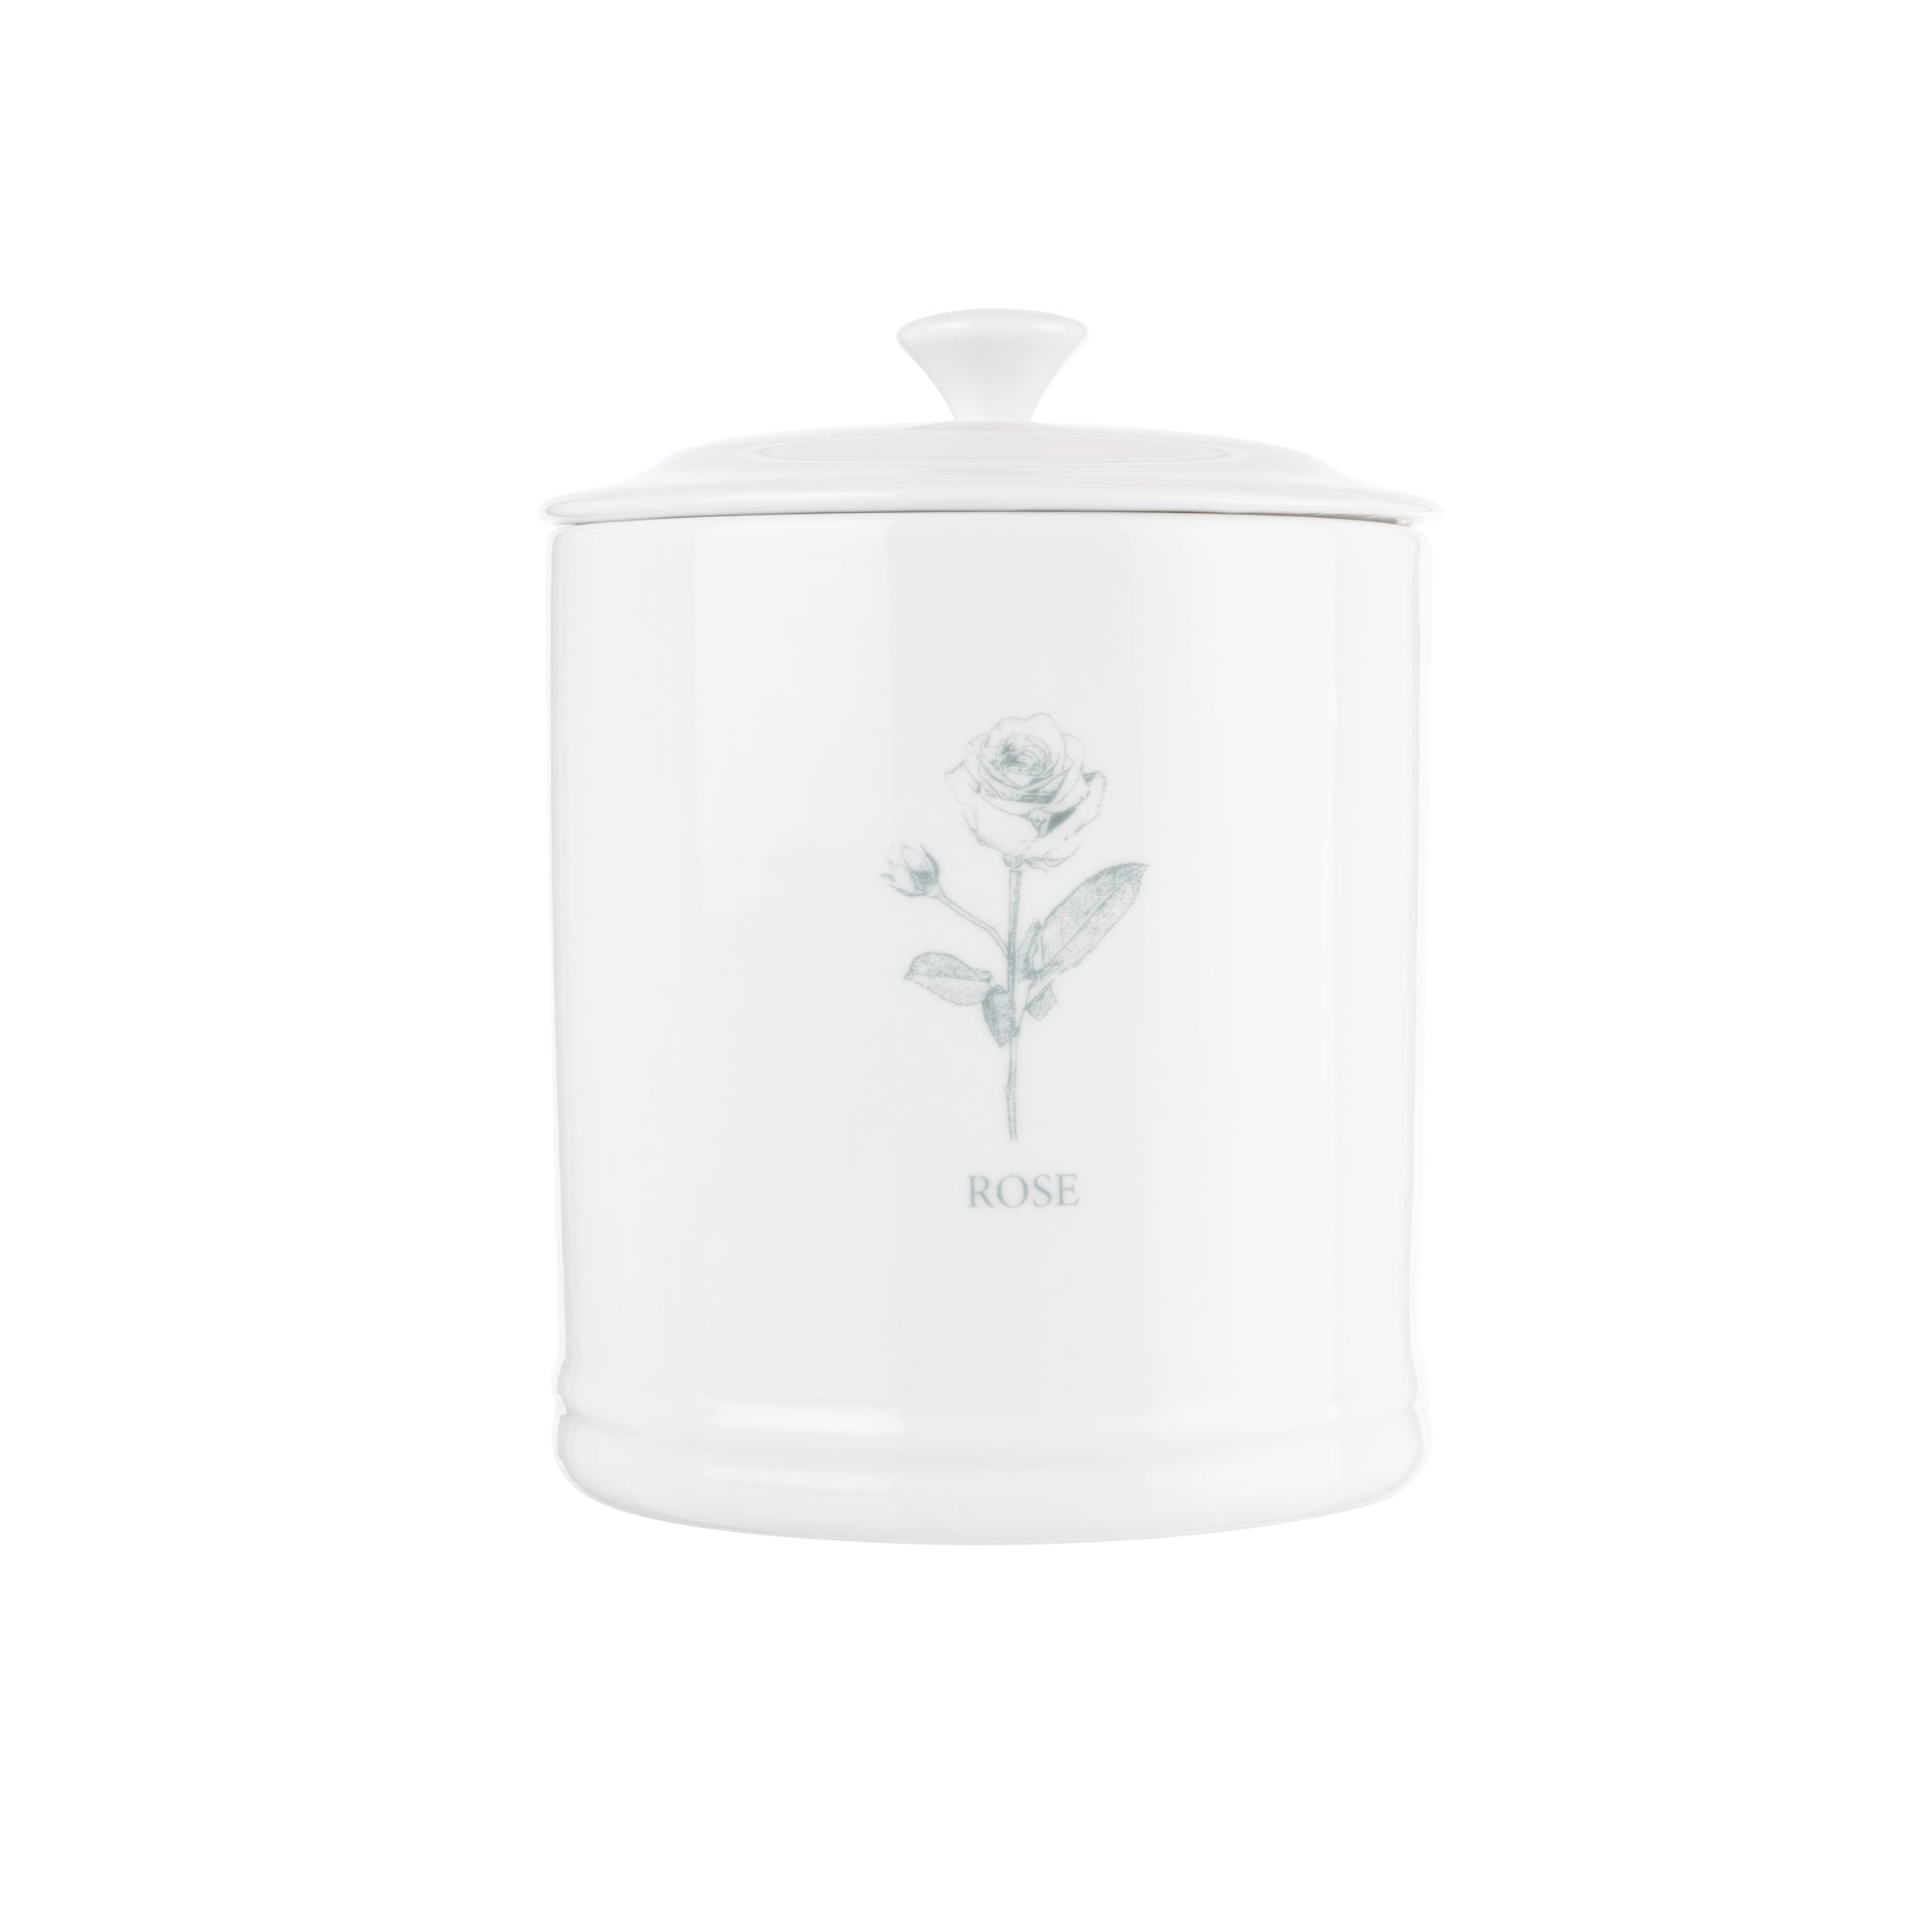 MARY BERRY ENGLISH GARDEN STORAGE CANISTER | ROSE